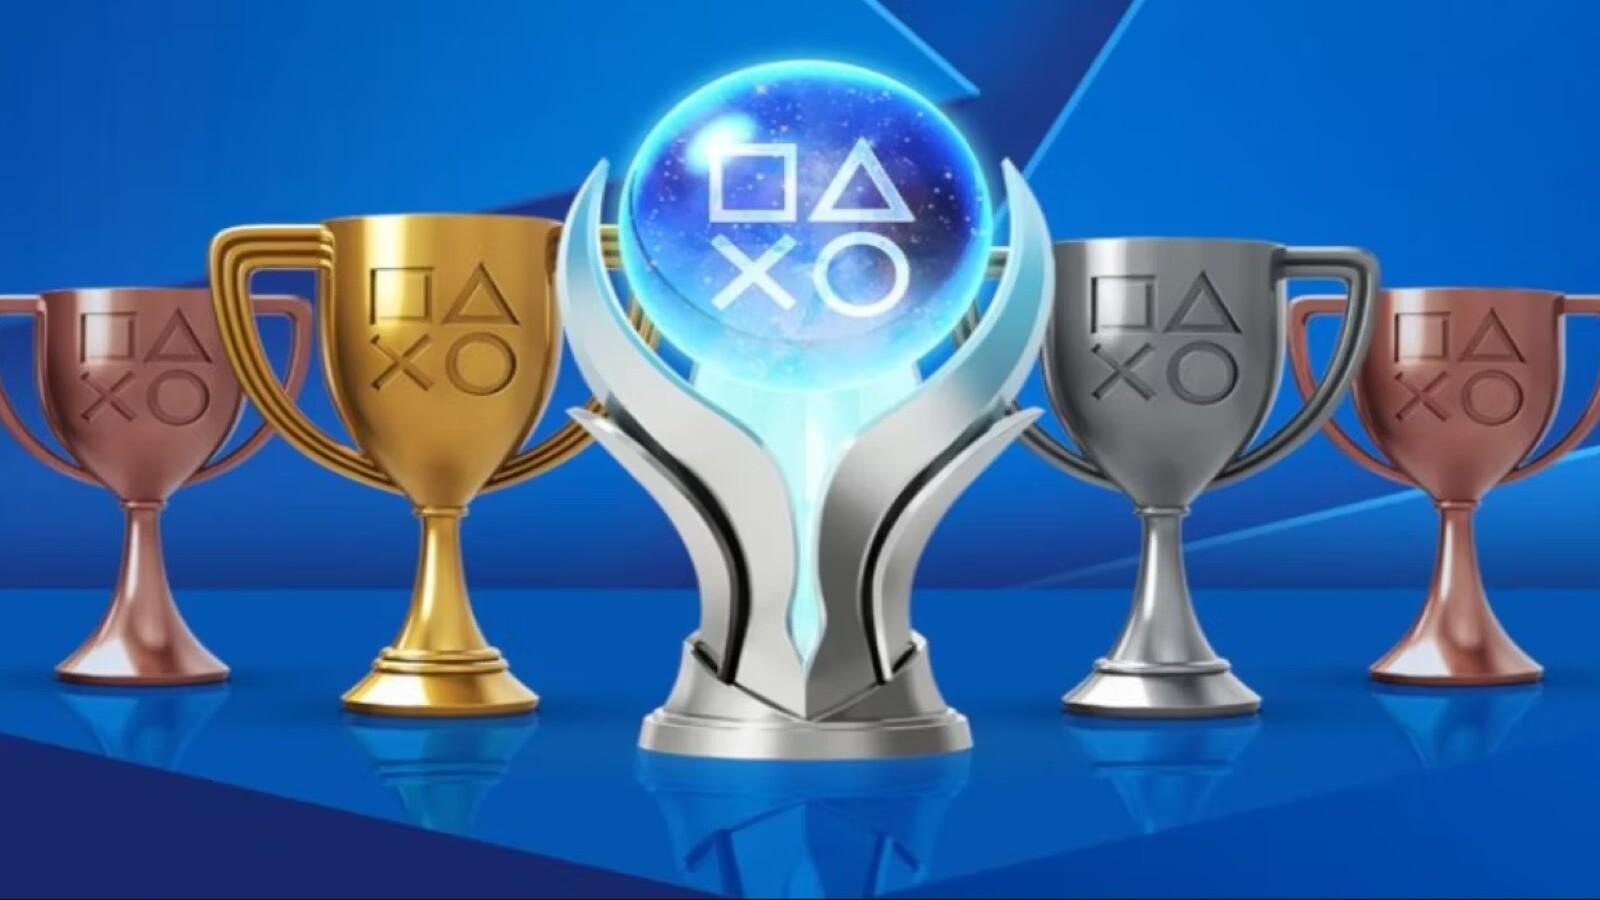 The different PlayStation trophies lined up